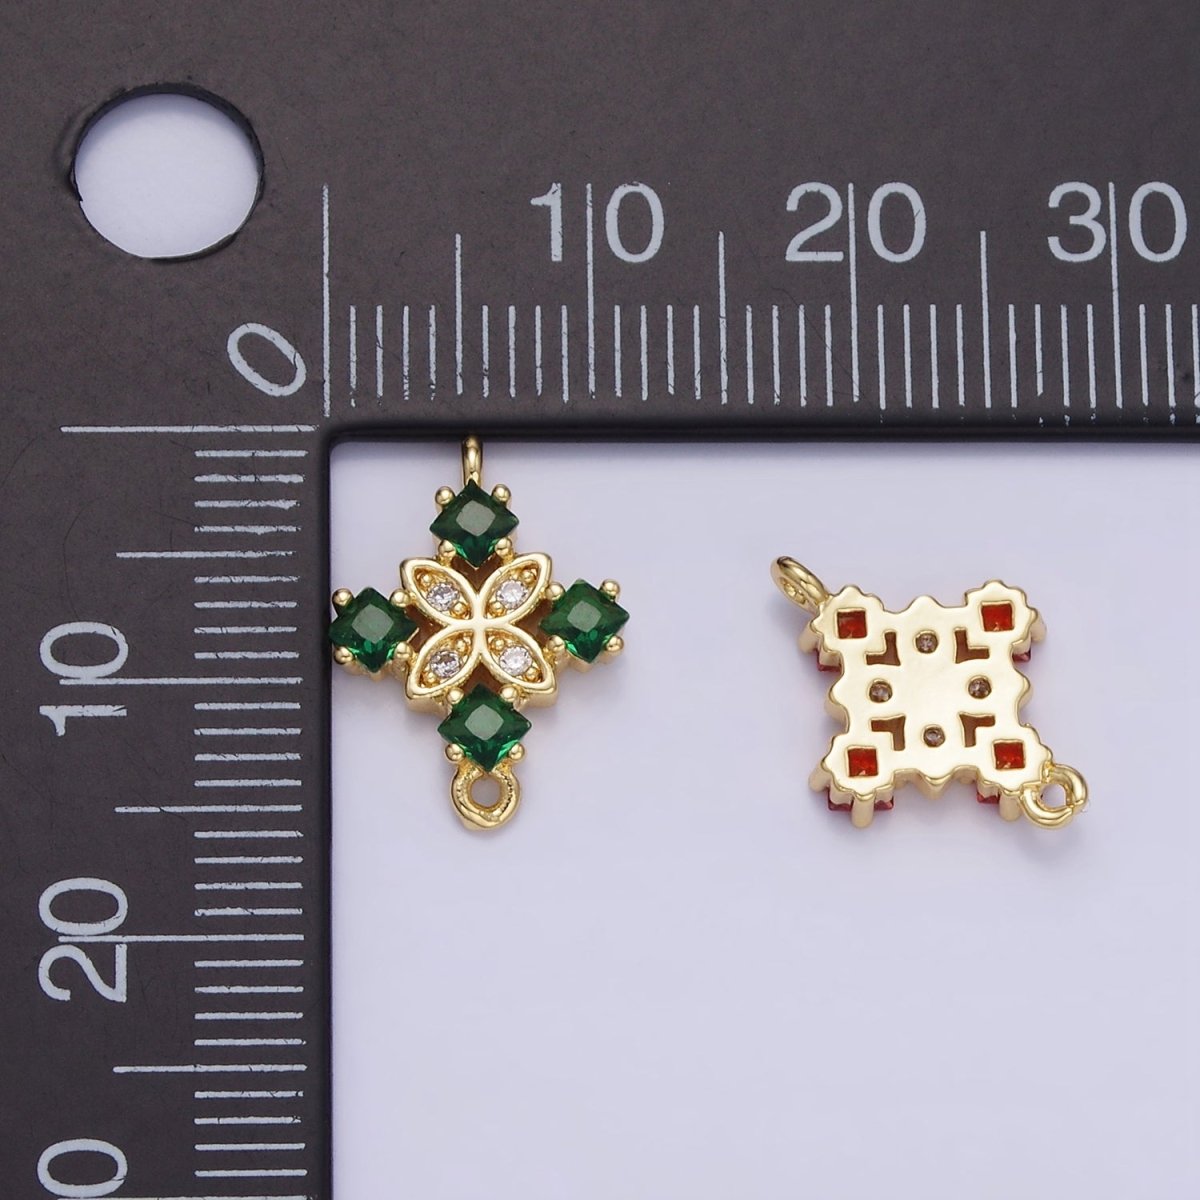 14K Gold Filled Clear, Purple, Green, Red, Pink Rhombus CZ Flower Connector | G339 - G341 - DLUXCA